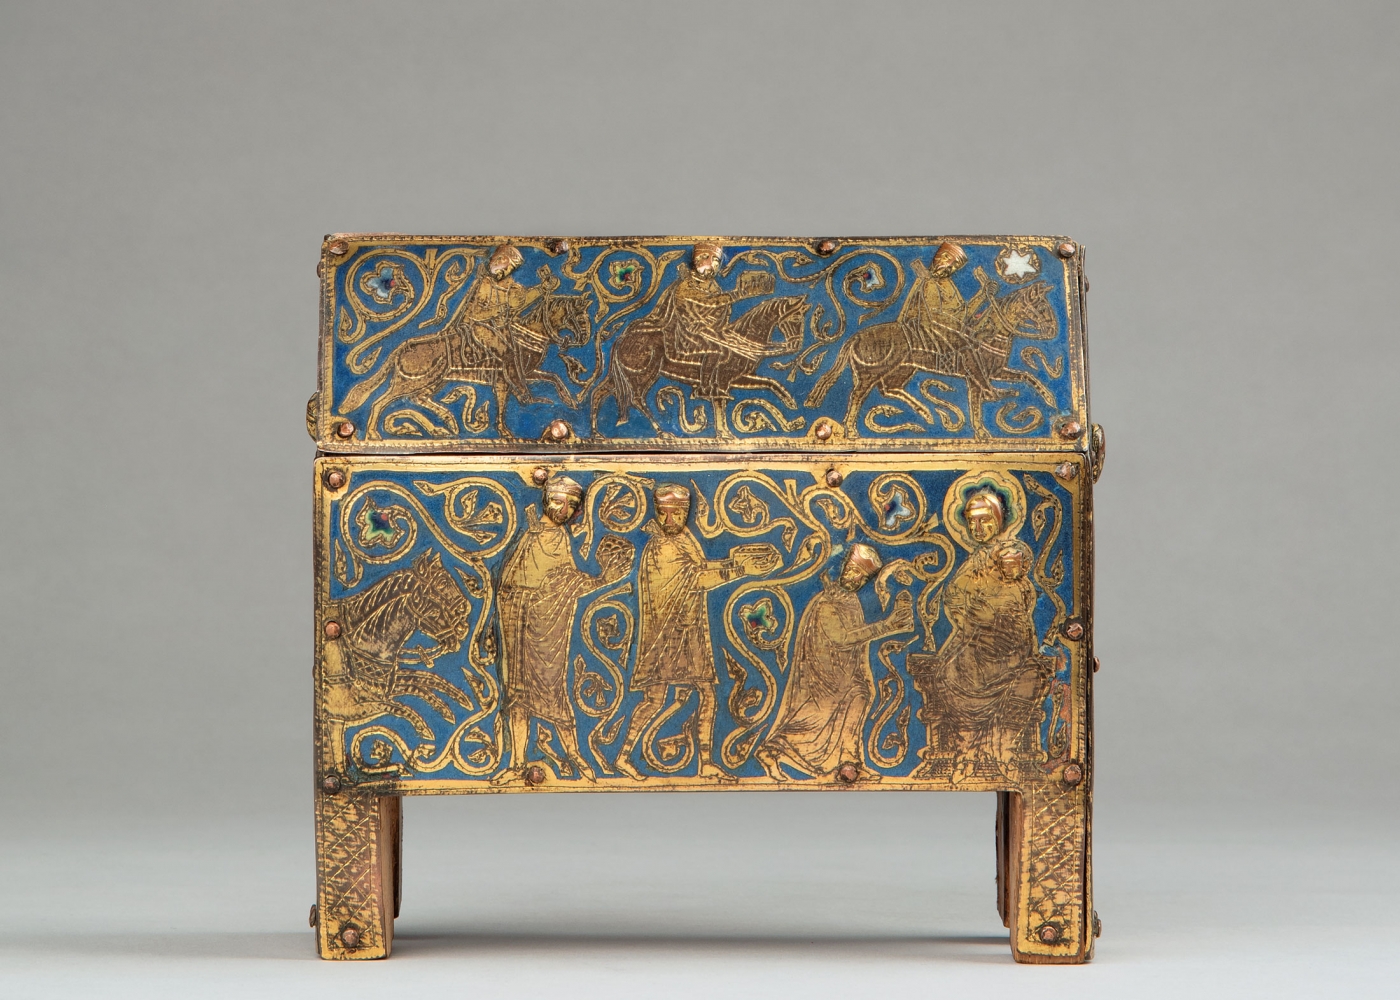 A reliquary chasse showing the Journey and Adoration of the Magi, c. 1230
France, Limoges
Cast, chased, engraved and gilded copper with champlev&amp;eacute; enamel, attached to a modern wooden core covered with pale red velvet lacking its pile
6 1/4 x 7 1/8 x 2 3/4 inches
(15.9 x 17.8 x 7 cm)